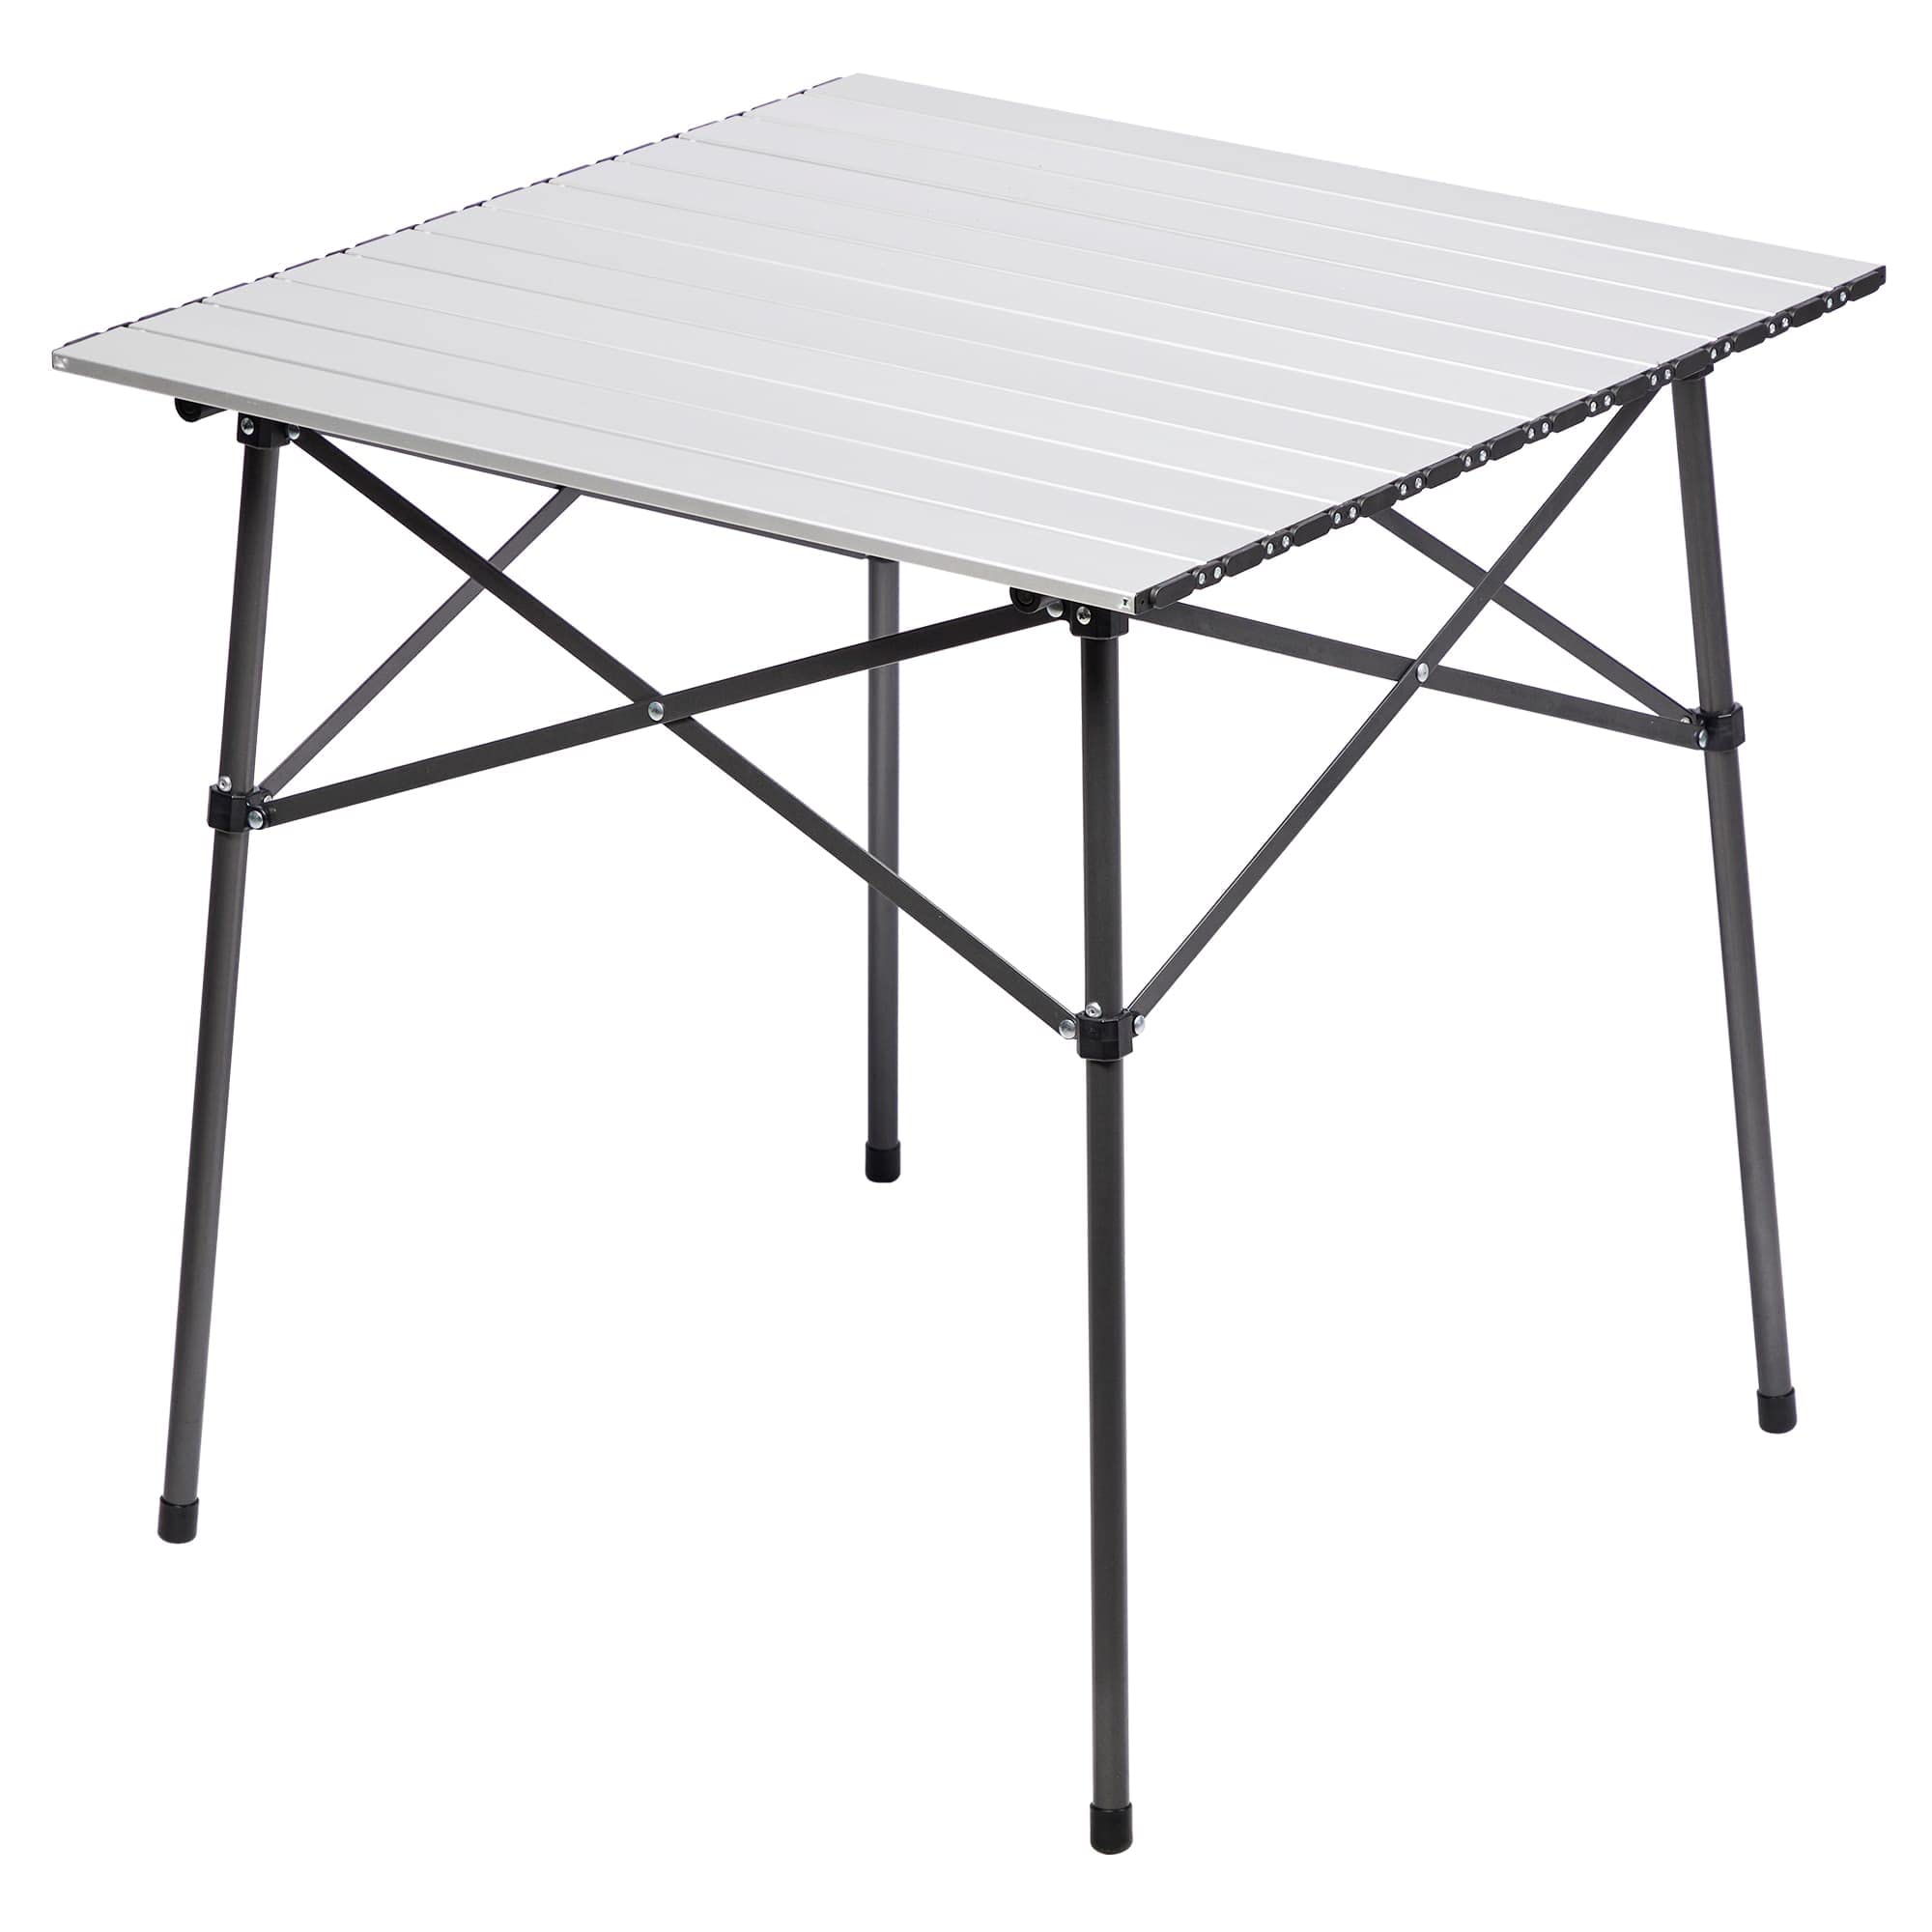 PORTAL Lightweight Aluminum Folding Square Table Roll Up Top 4 People Compact Table with Carry Bag for Camping, Picnic, Backyards, BBQ Silver Square Table